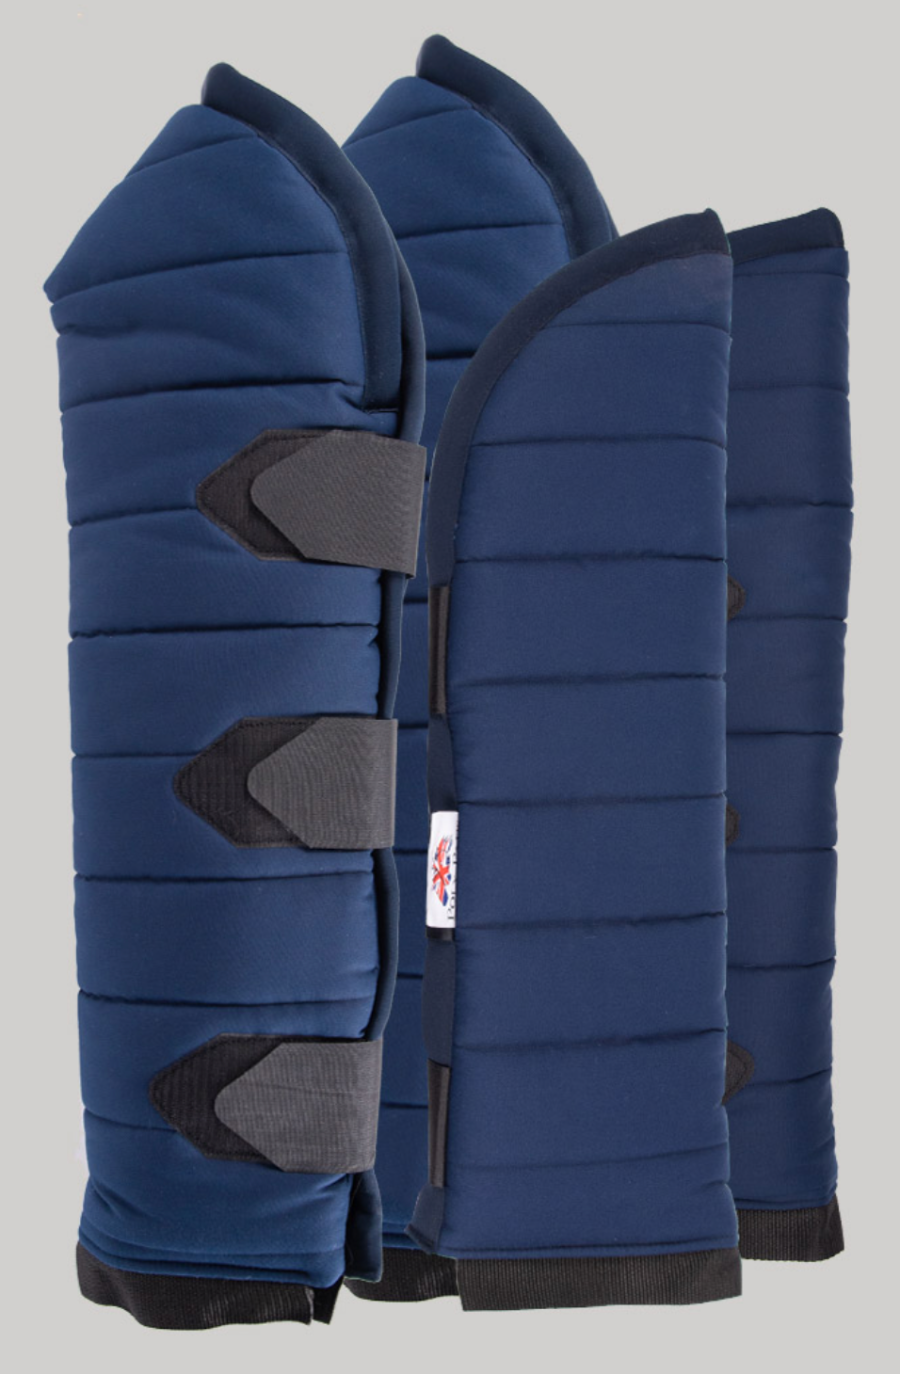 PolyPads Travel Boots